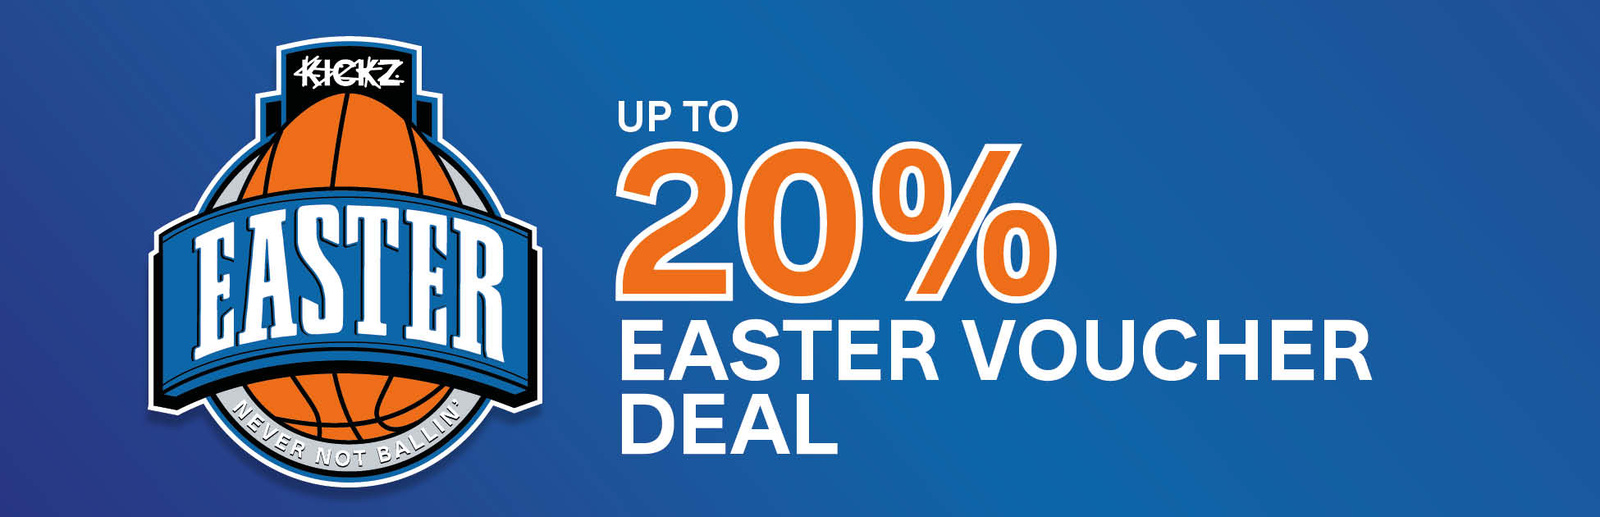 EASTER DEAL - VOUCHERS UP TO 20% OFF